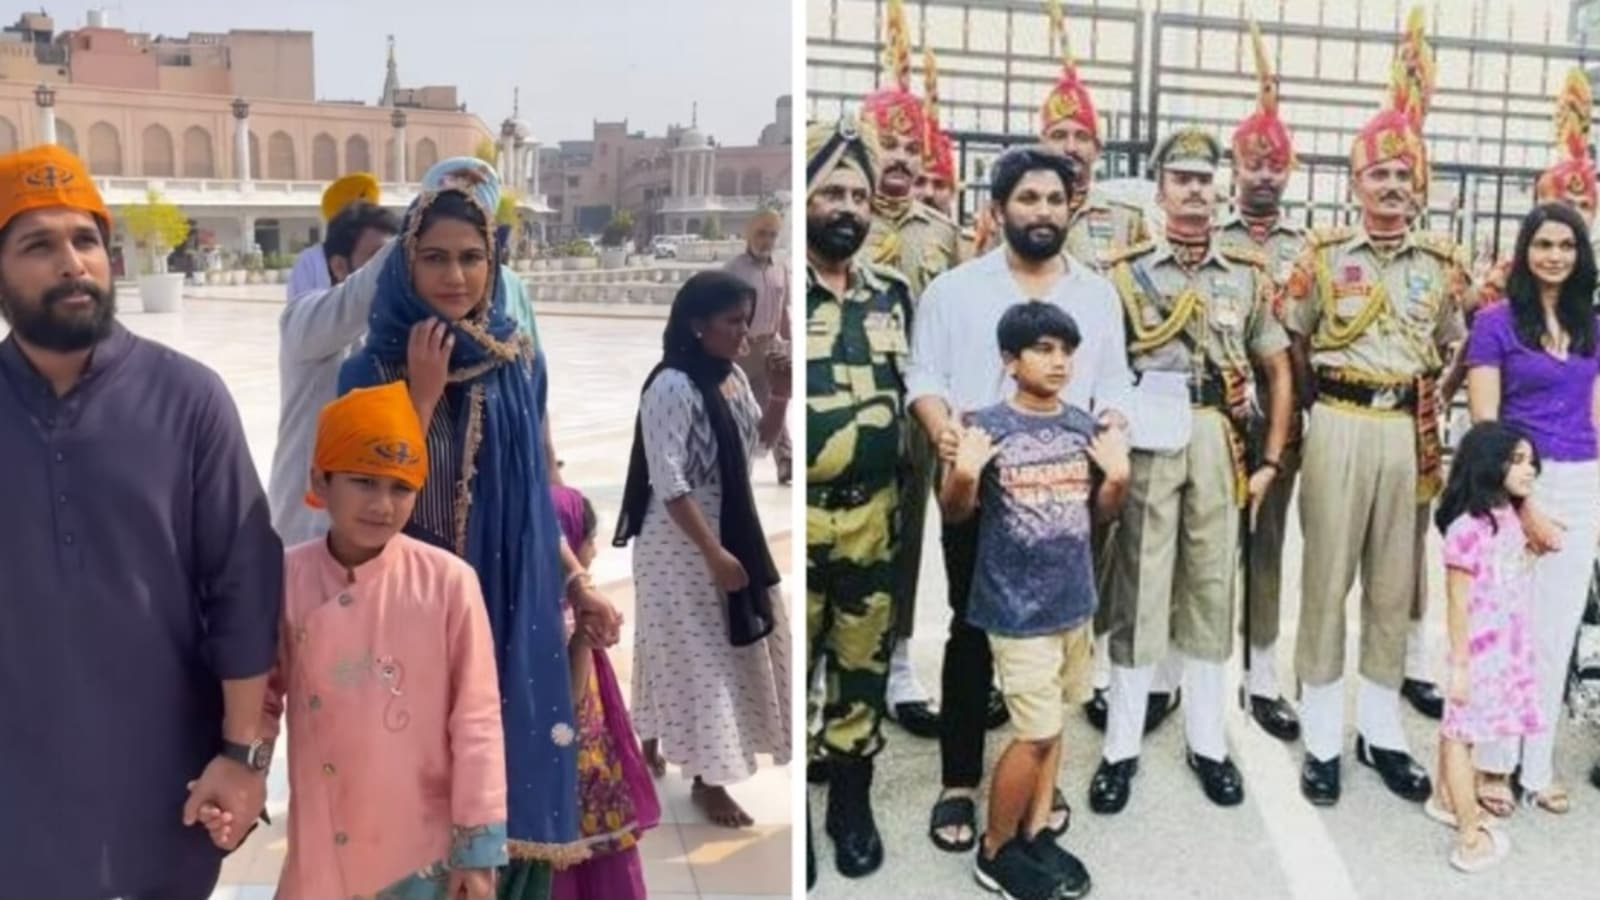 Allu Arjun visits Golden temple and Wagah Border with family, is greeted by fans - Hindustan Times